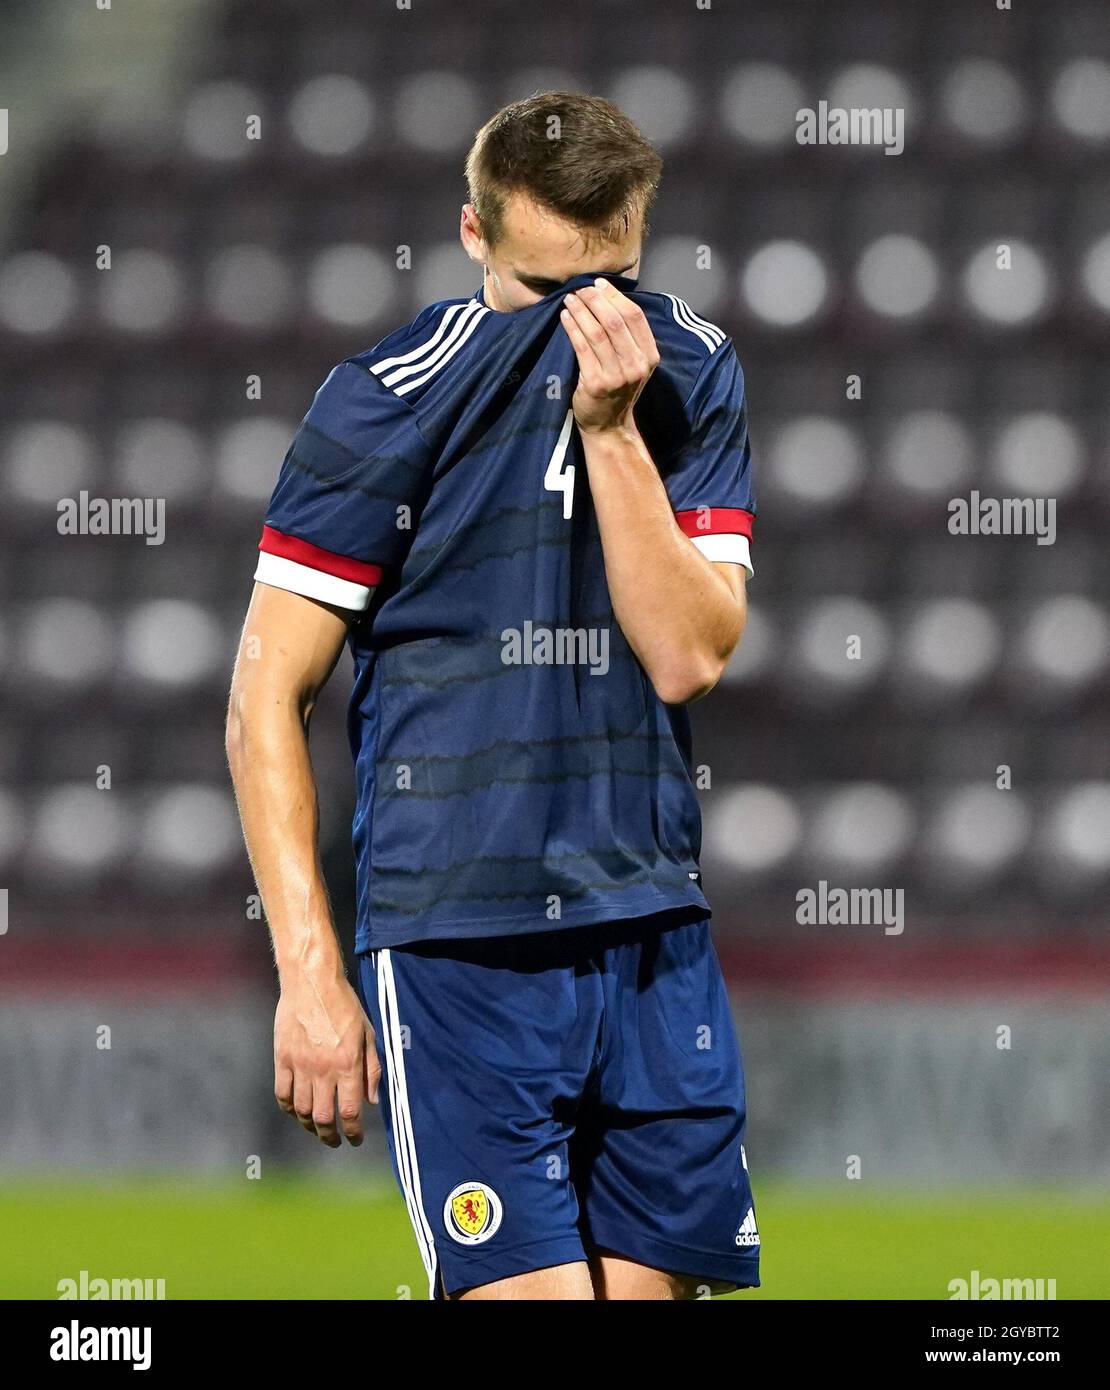 Scotland's Lewis Mayo looks dejected after the UEFA Under-21 Championship Qualifying Round Group I match at Tynecastle Park, Edinburgh. Picture date: Thursday, October 7, 2021. Stock Photo